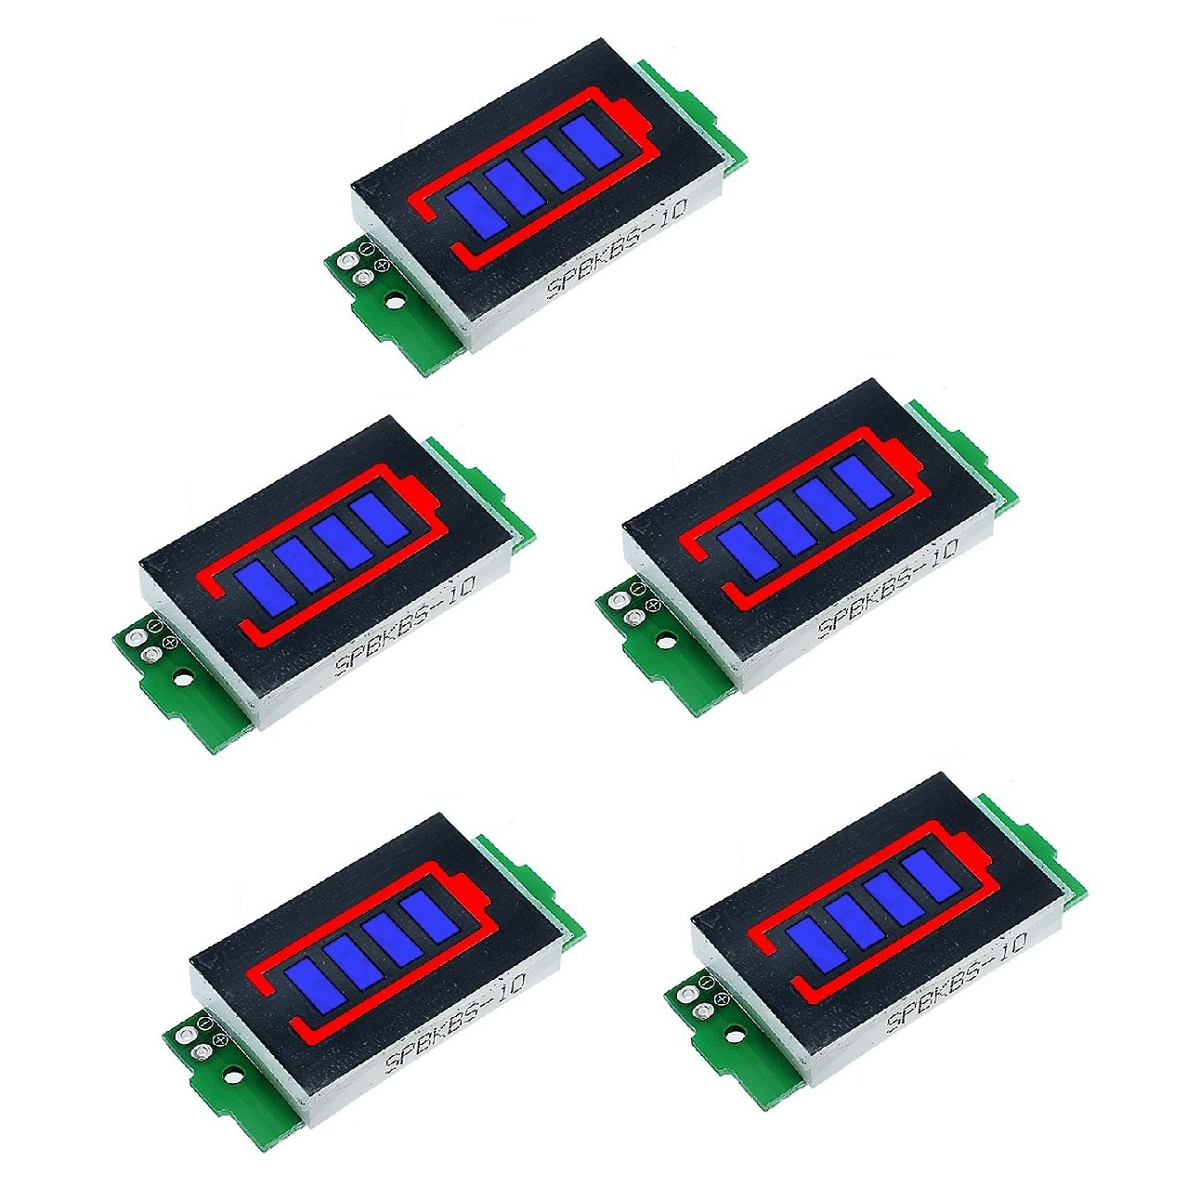 5Pcs 1S-8S Single 3.7V Lithium Battery Capacity Indicator Module 4.2V Blue Display Electric Vehicle Battery Power Tester